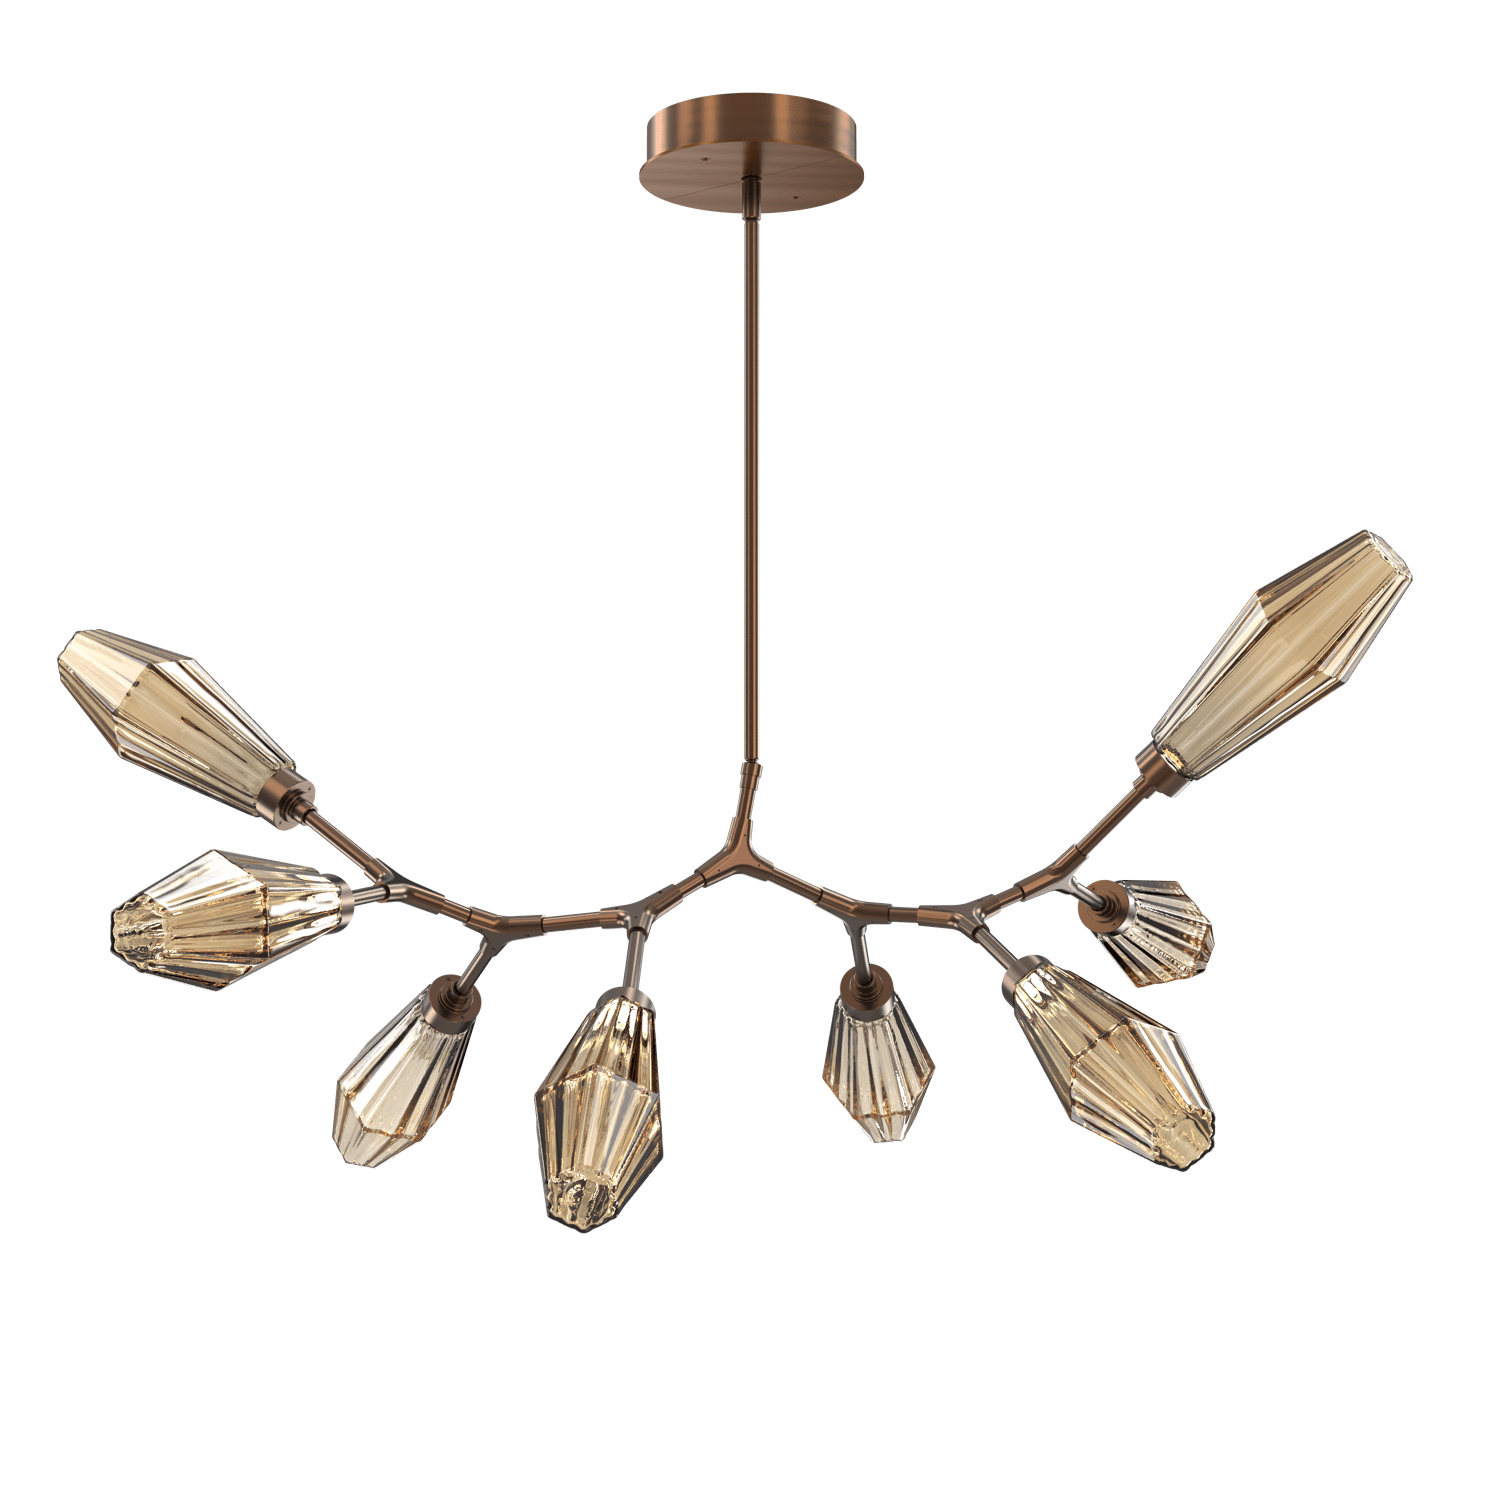 PLB0049-BB-RB-RB-Hammerton-Studio-Aalto-8-light-modern-branch-chandelier-with-oil-rubbed-bronze-finish-and-optic-ribbed-bronze-glass-shades-and-LED-lamping